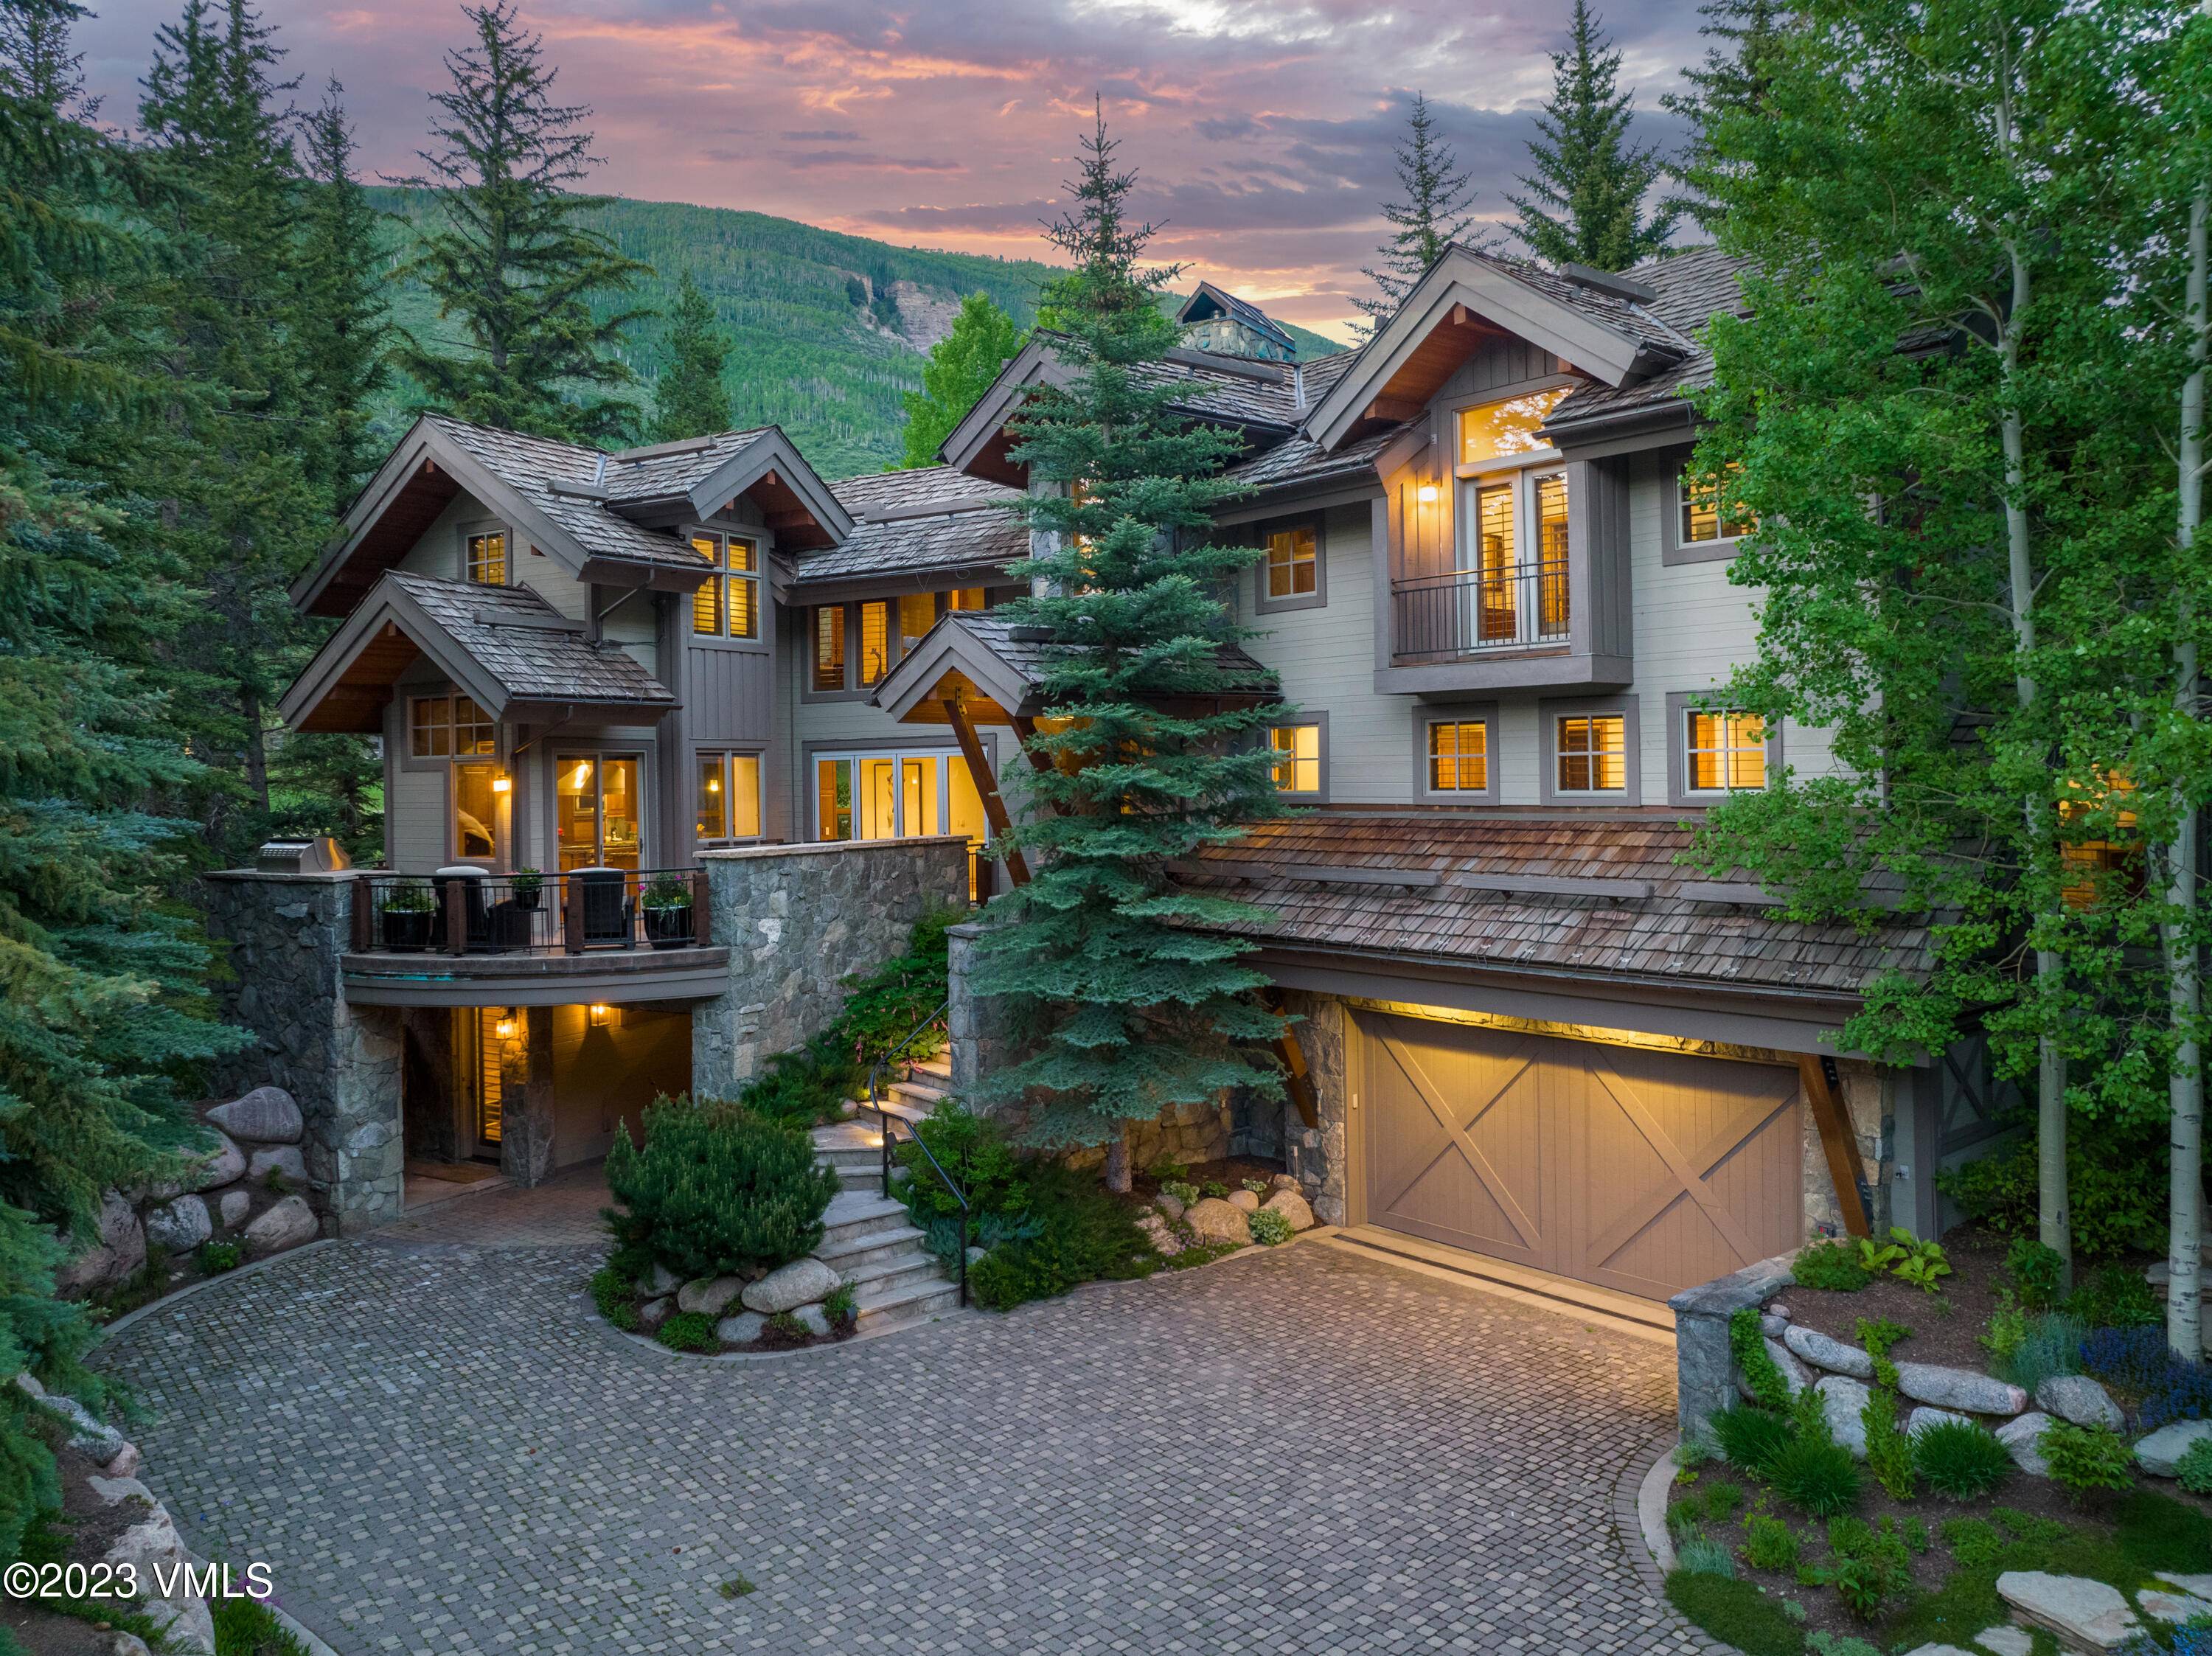 Situated on a quiet cul de sac in the coveted Vail Golf Course neighborhood, this remarkable single family residence defines timeless elegance, sophistication and convenience.